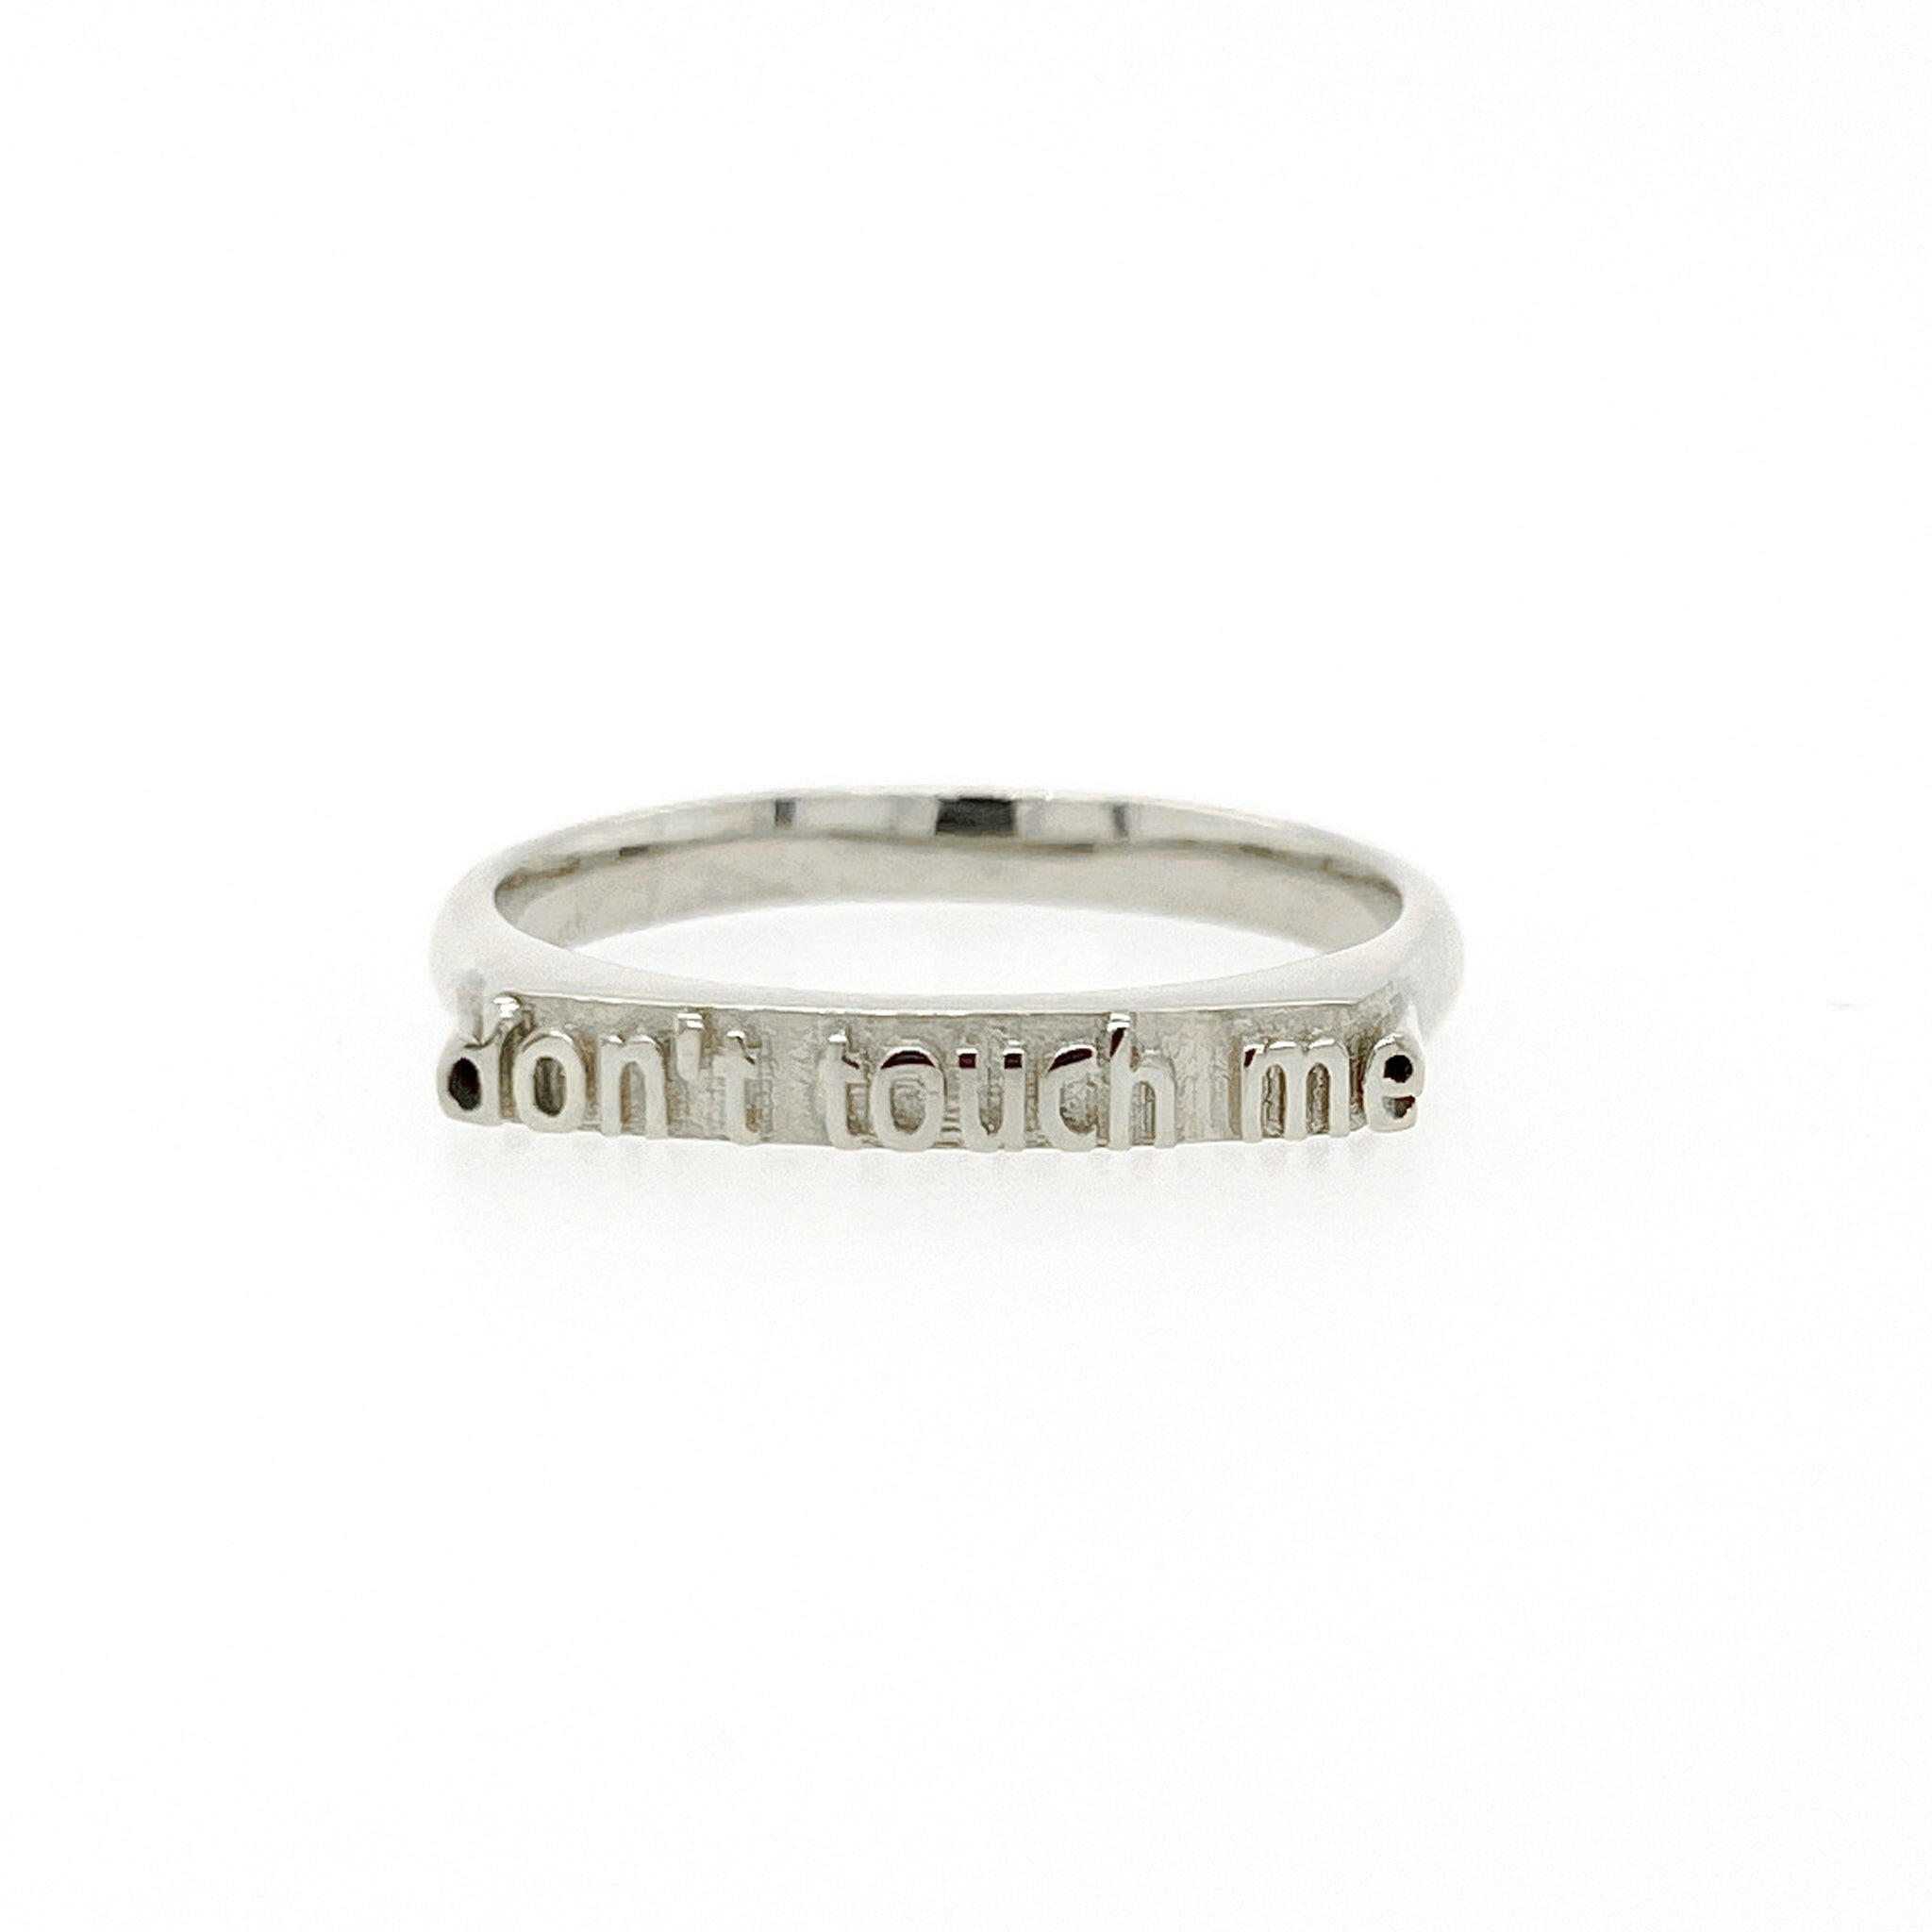 front view of 14k white gold ring with text that reads "don't touch me"